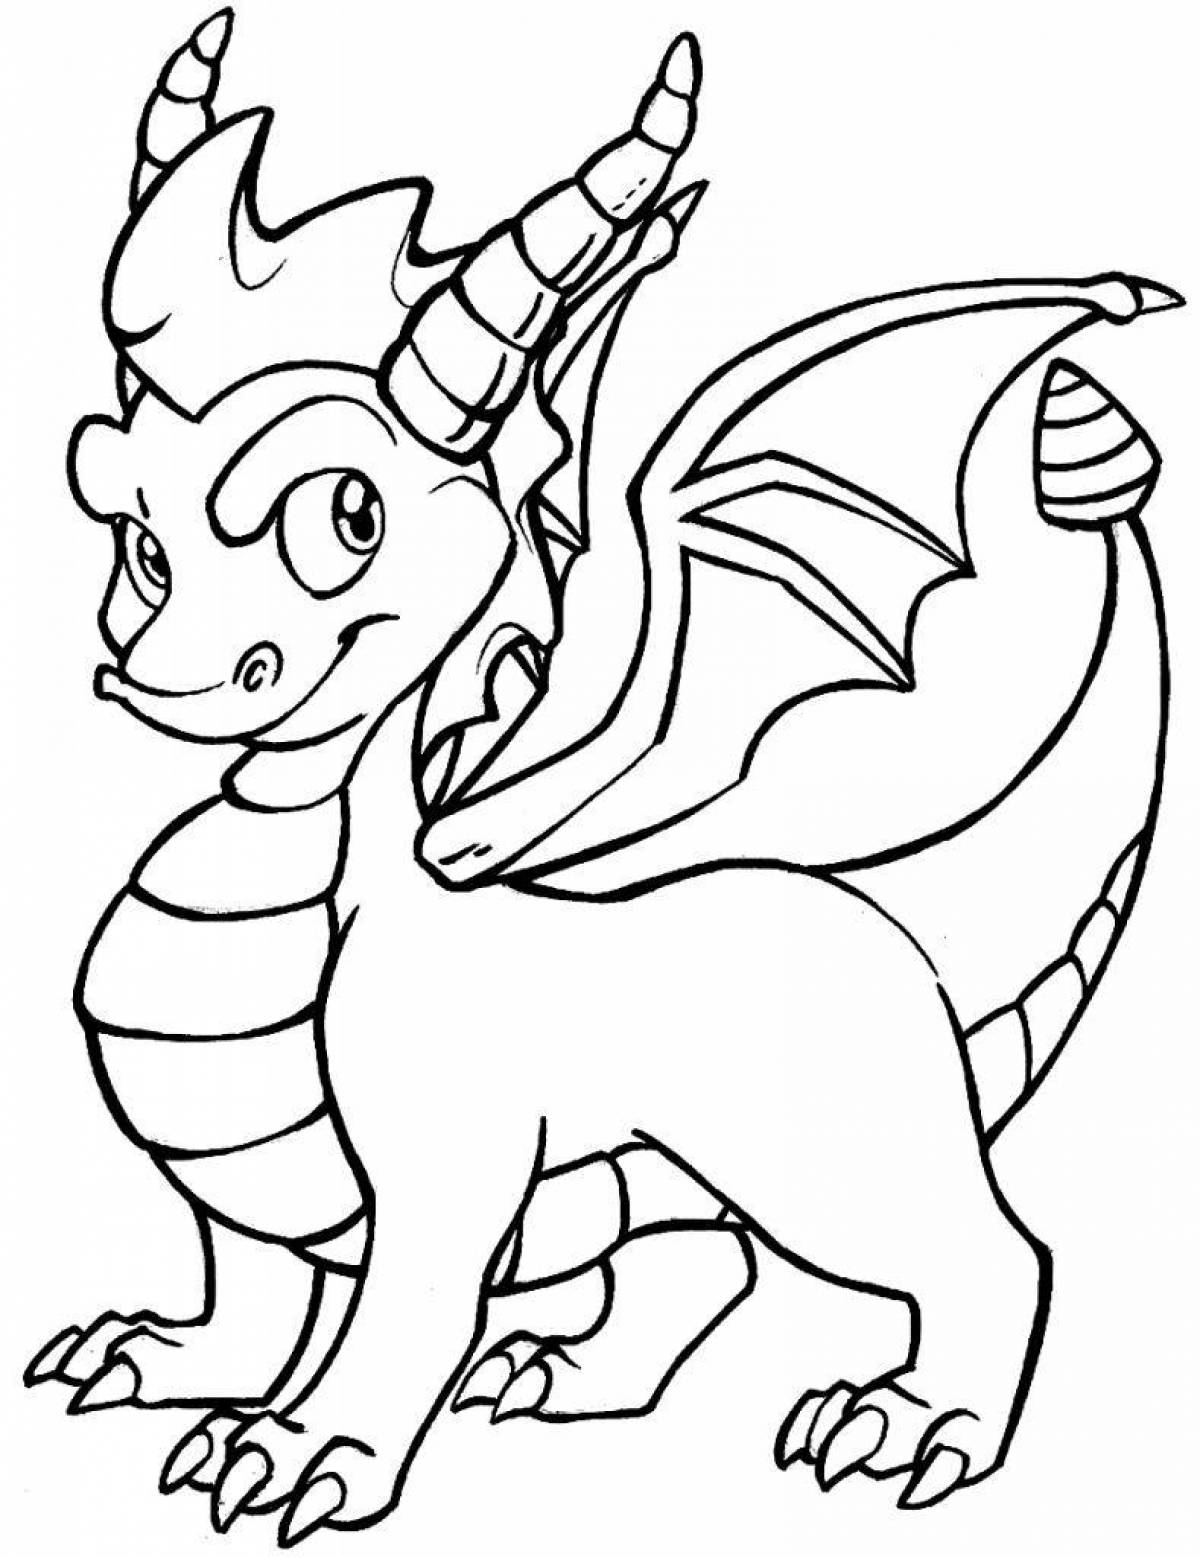 Color-frenzy coloring page dragon children's